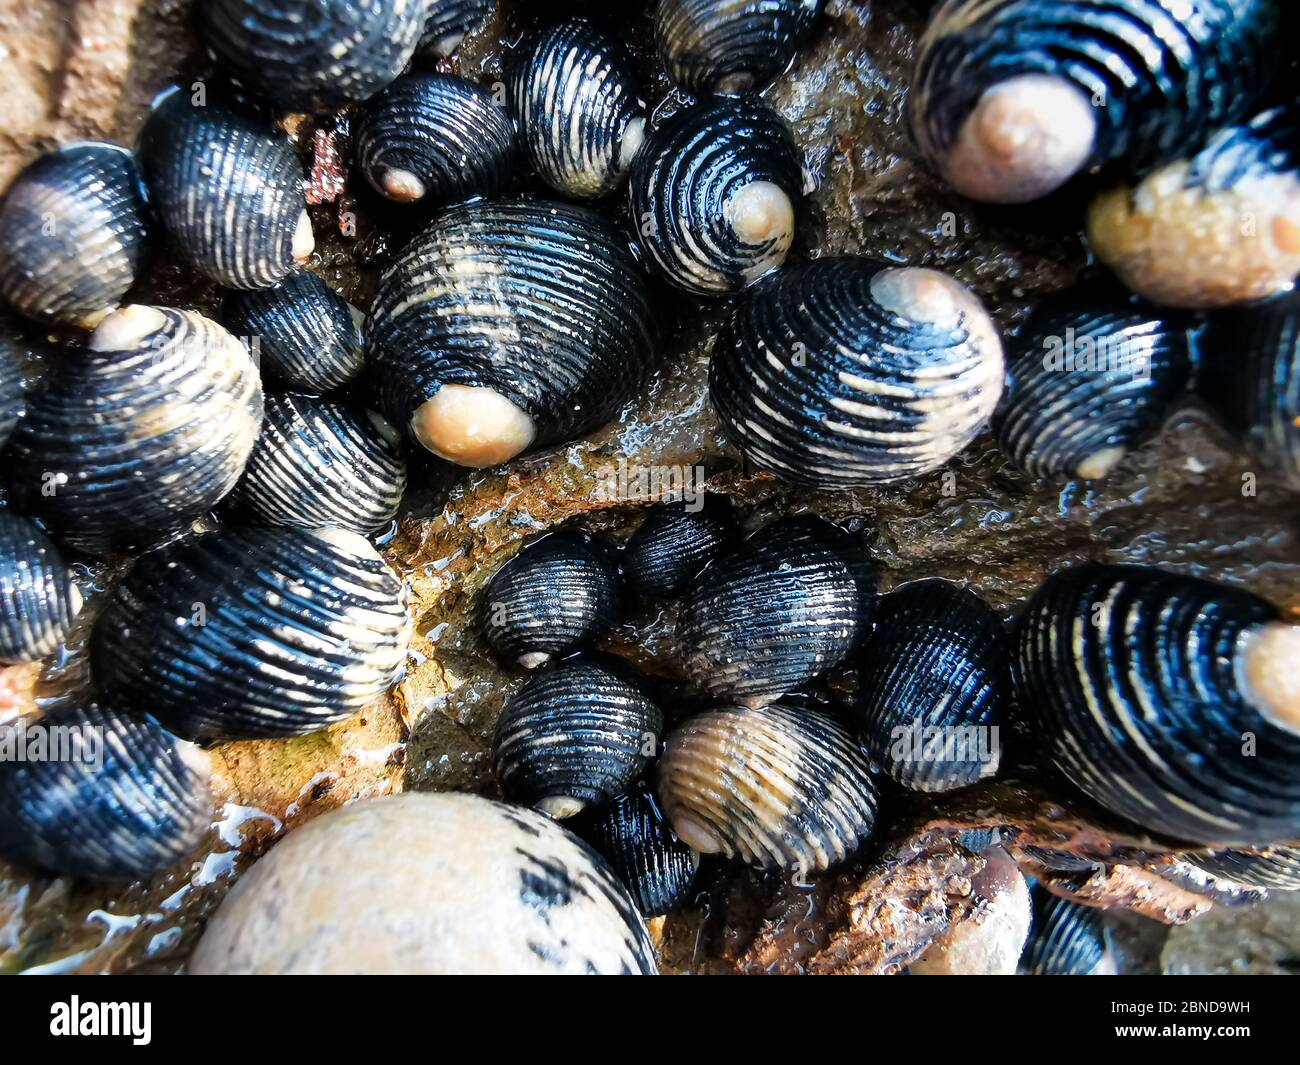 Group of snails on the rock. Stock Photo